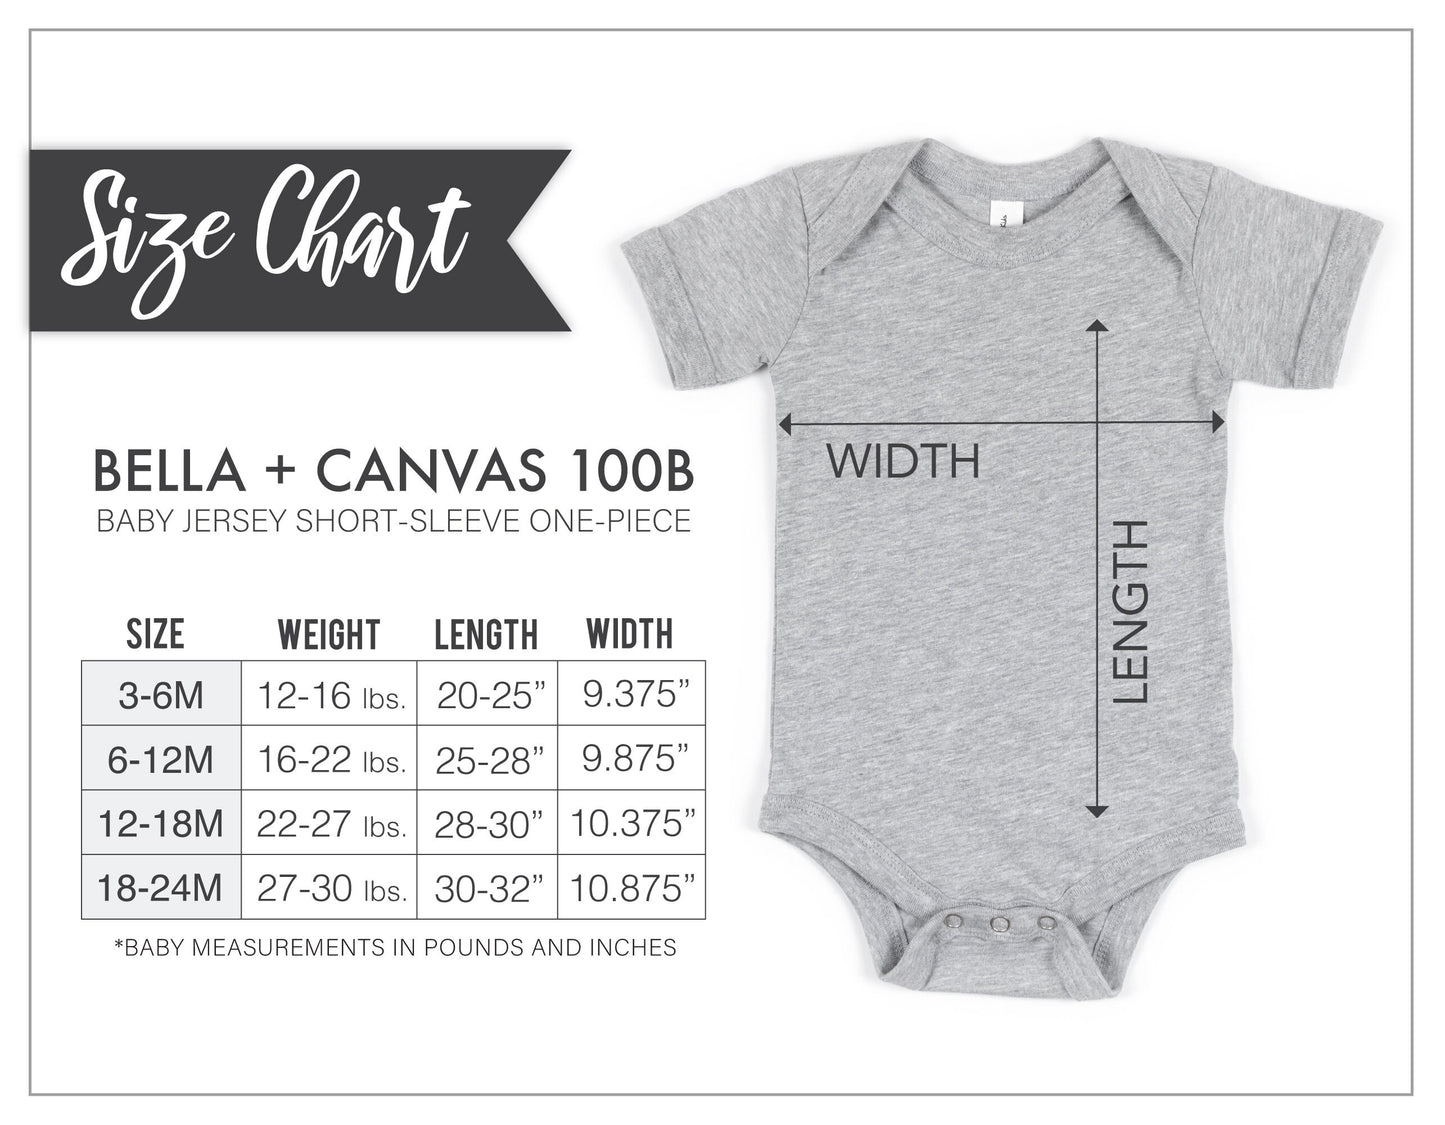 TVD Onesie, Personalized newborn gift, tvd gift for new mom, Infant TVD shirt, Salvatore Brother, TVD gift